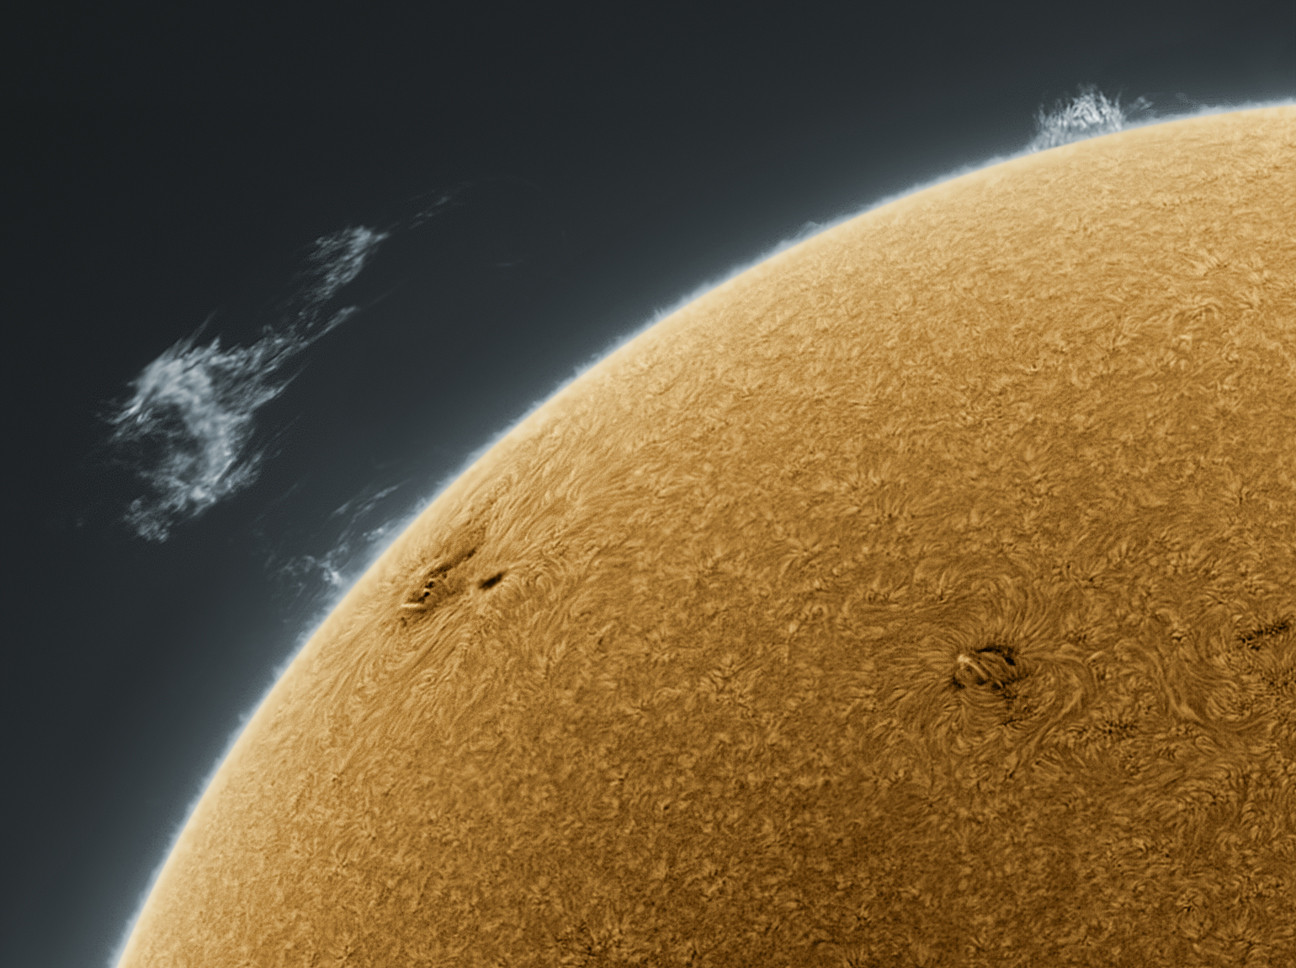 Picture of the Sun through a lens that allows only a specific wavelength